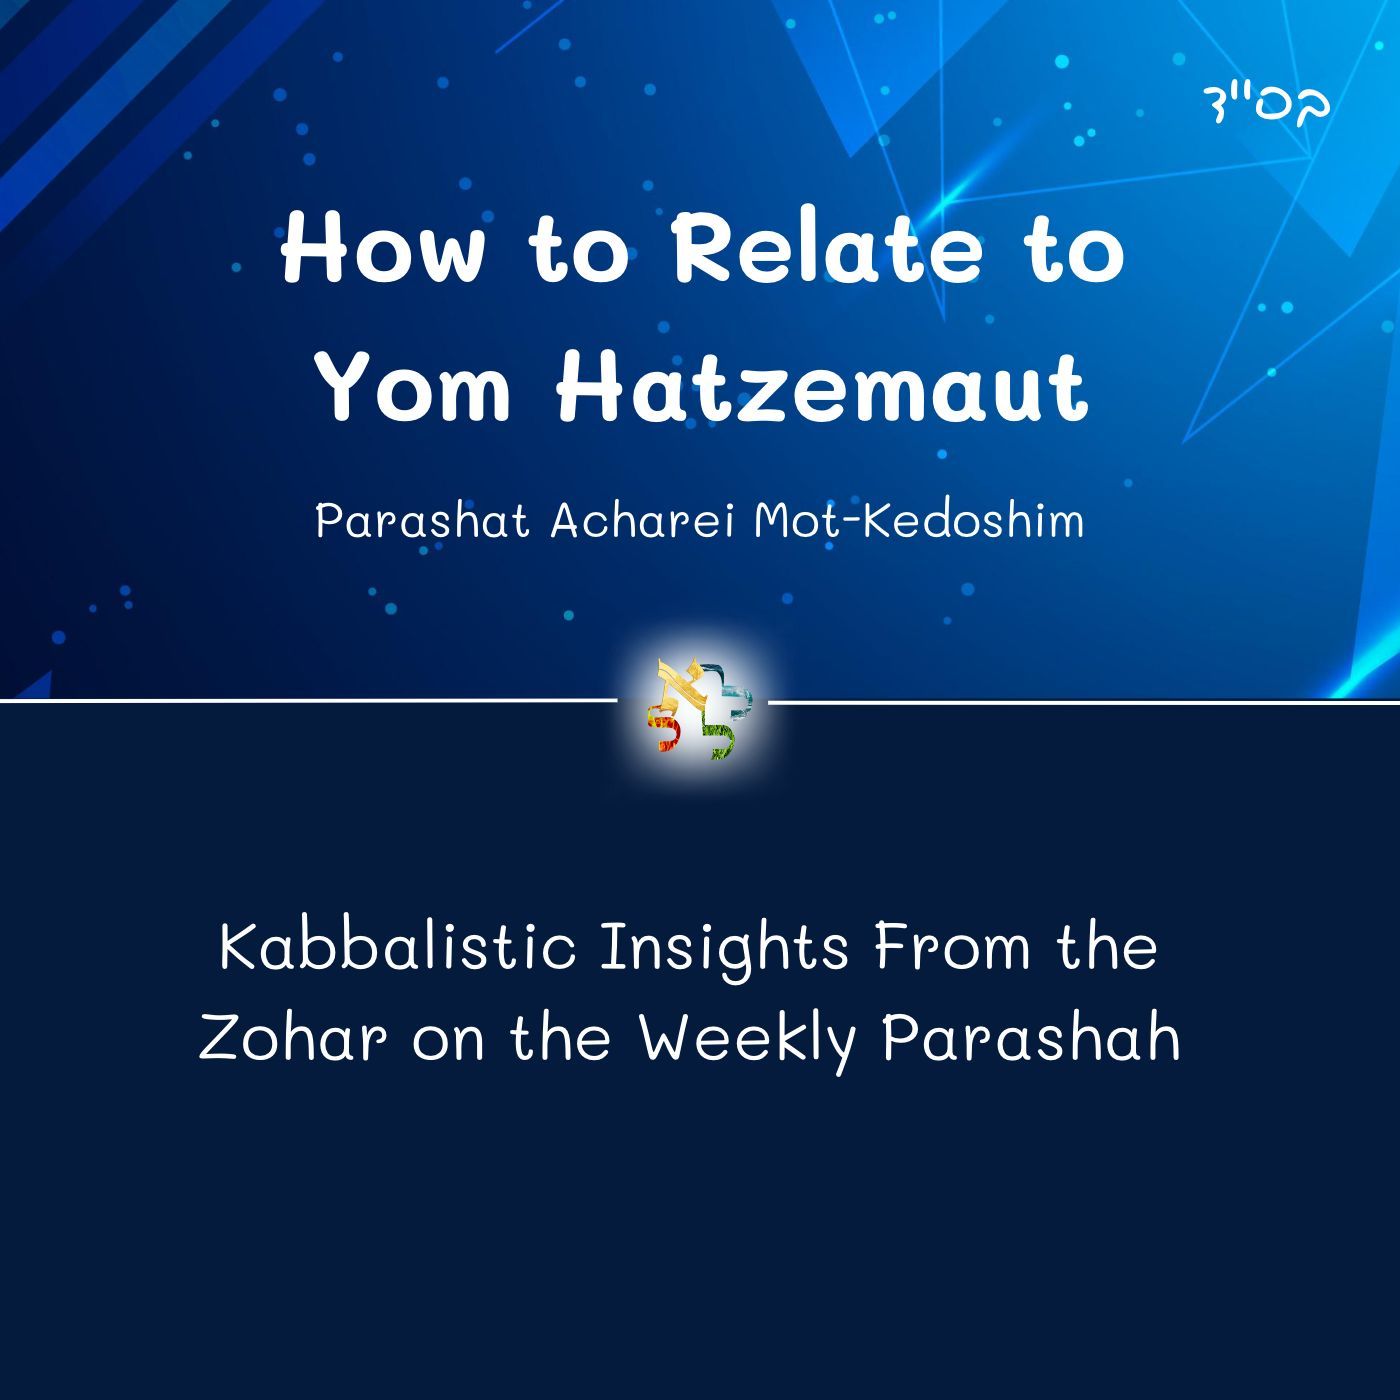 How to Relate to Yom Hatzemaut - Kabbalistic Inspiration on the Parasha from the Zohar